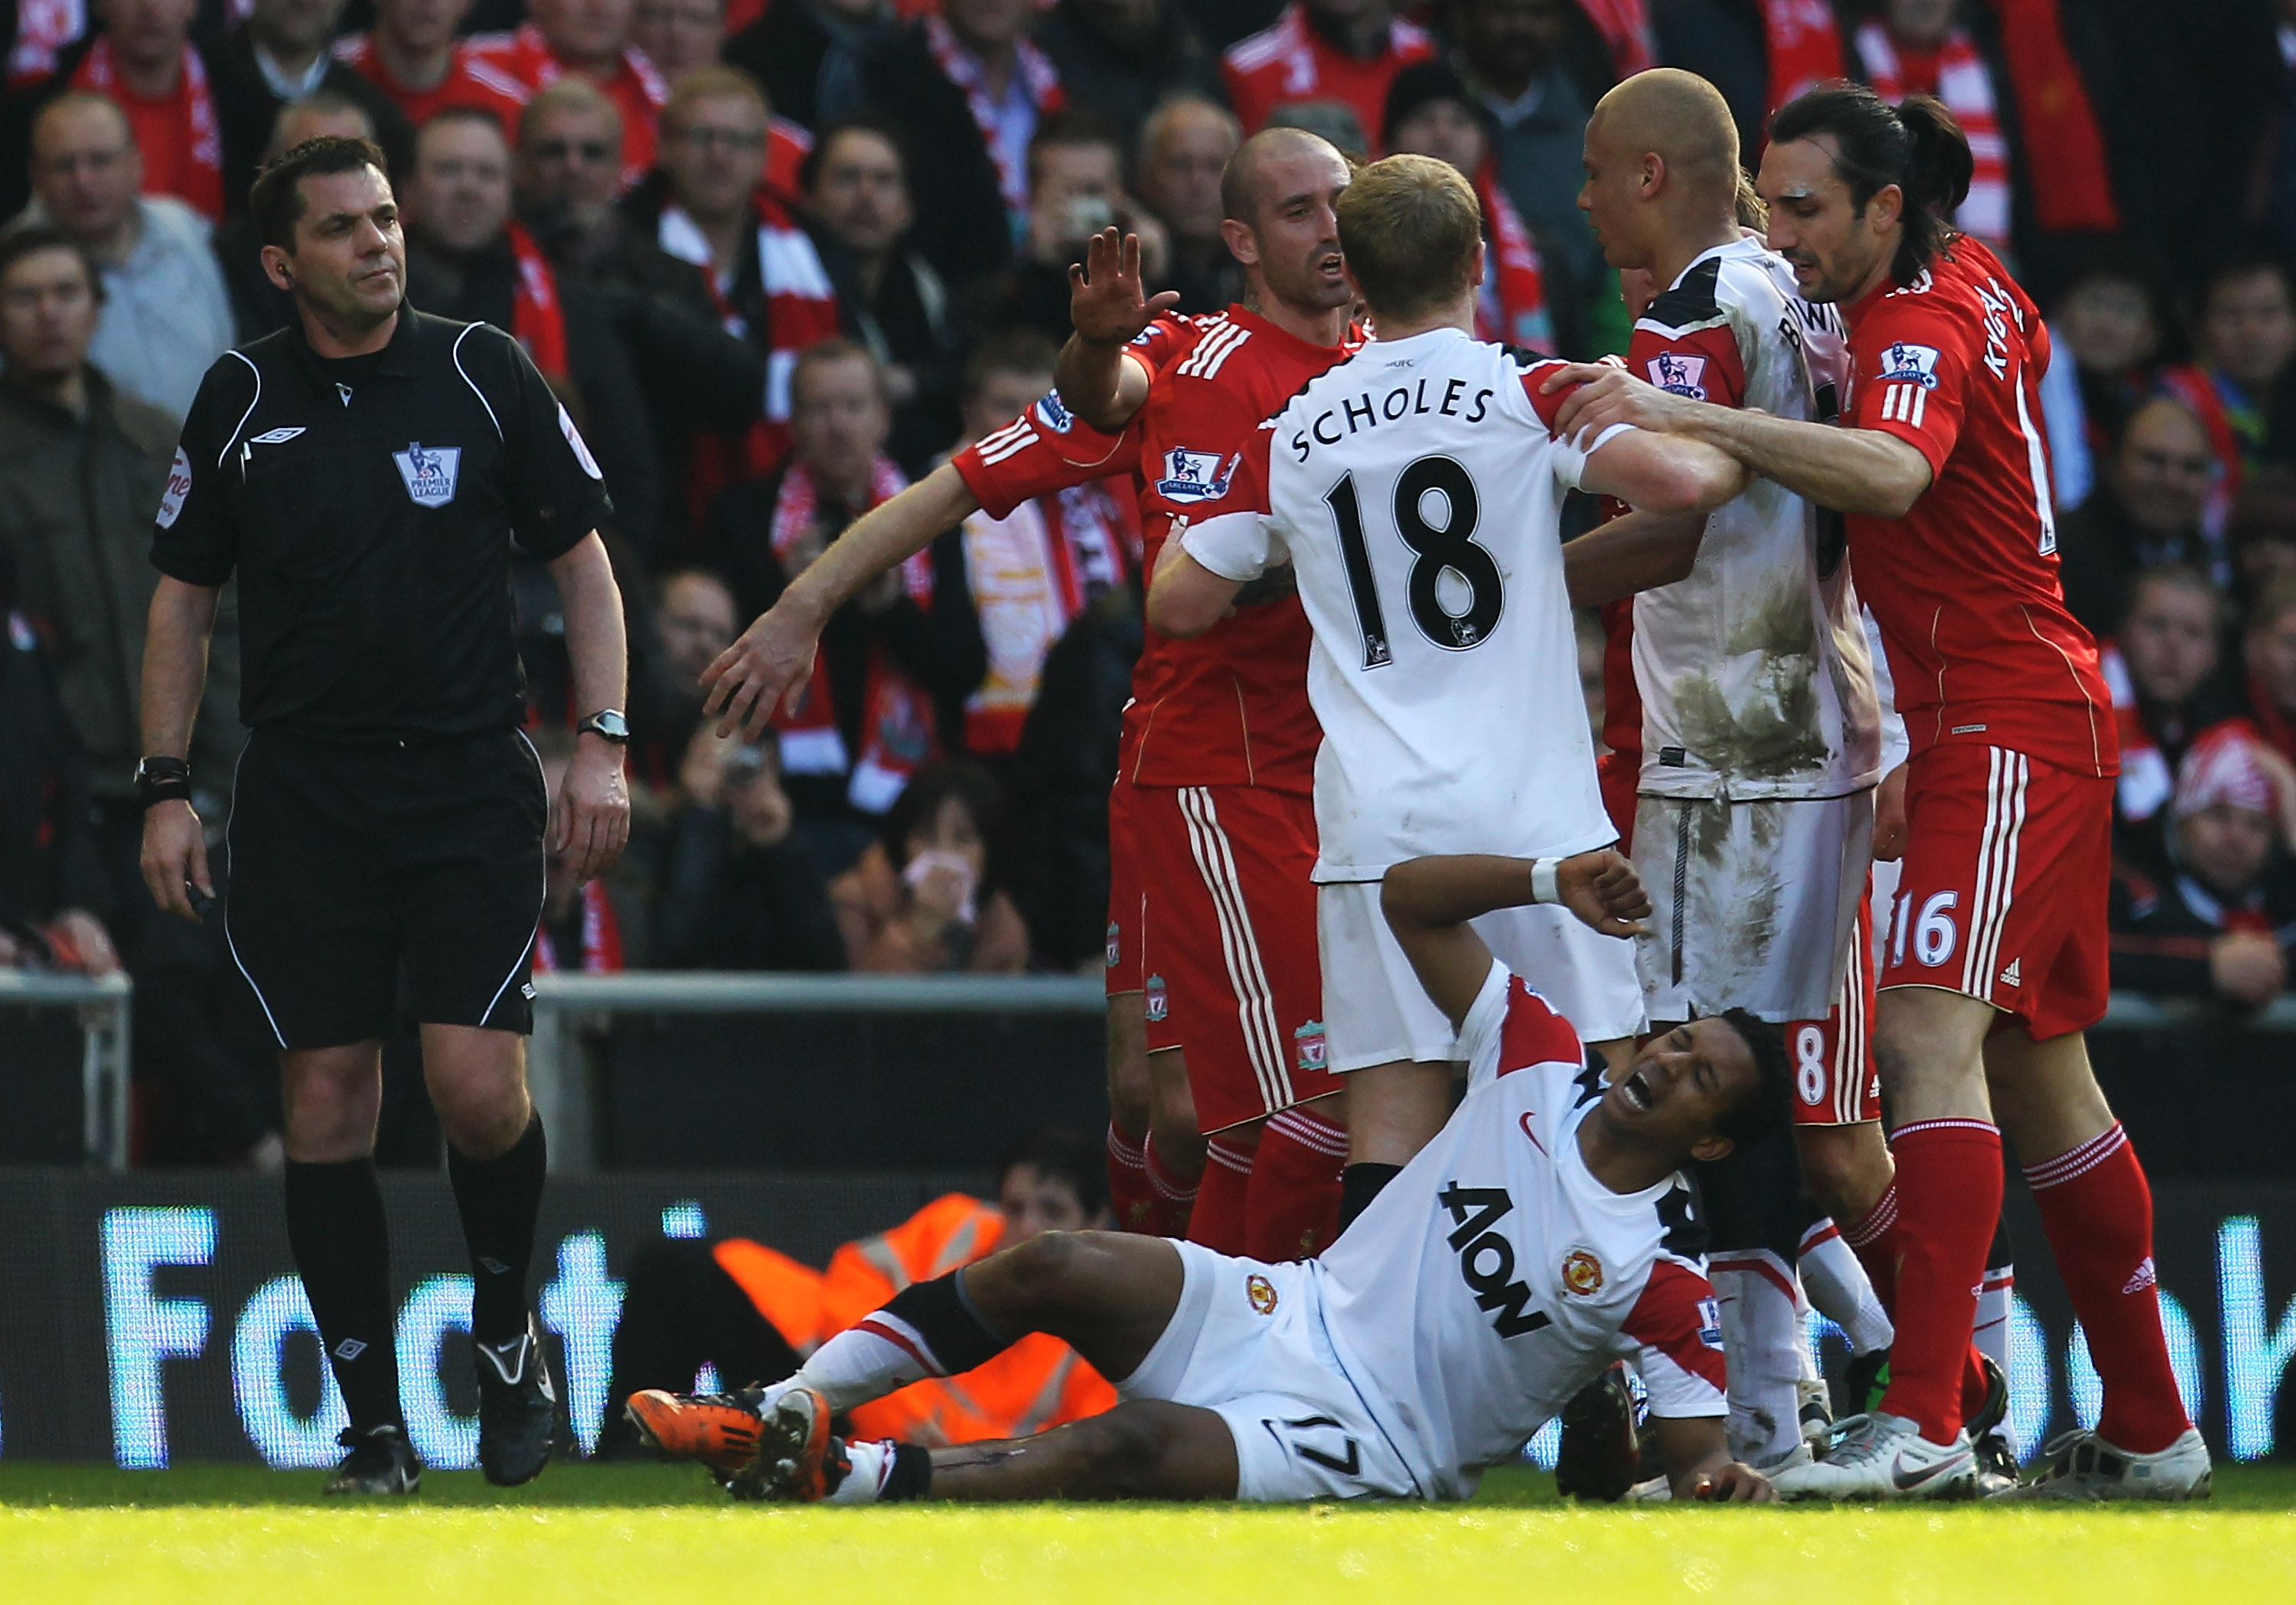 LIVERPOOL, UNITED KINGDOM - MARCH 06:  Nani of Manchester United lies on the pitch following a challenge by Jamie Carragher of Liverpool during the Barclays Premier League match between Liverpool and Manchester United at Anfield on March 6, 2011 in Liverp